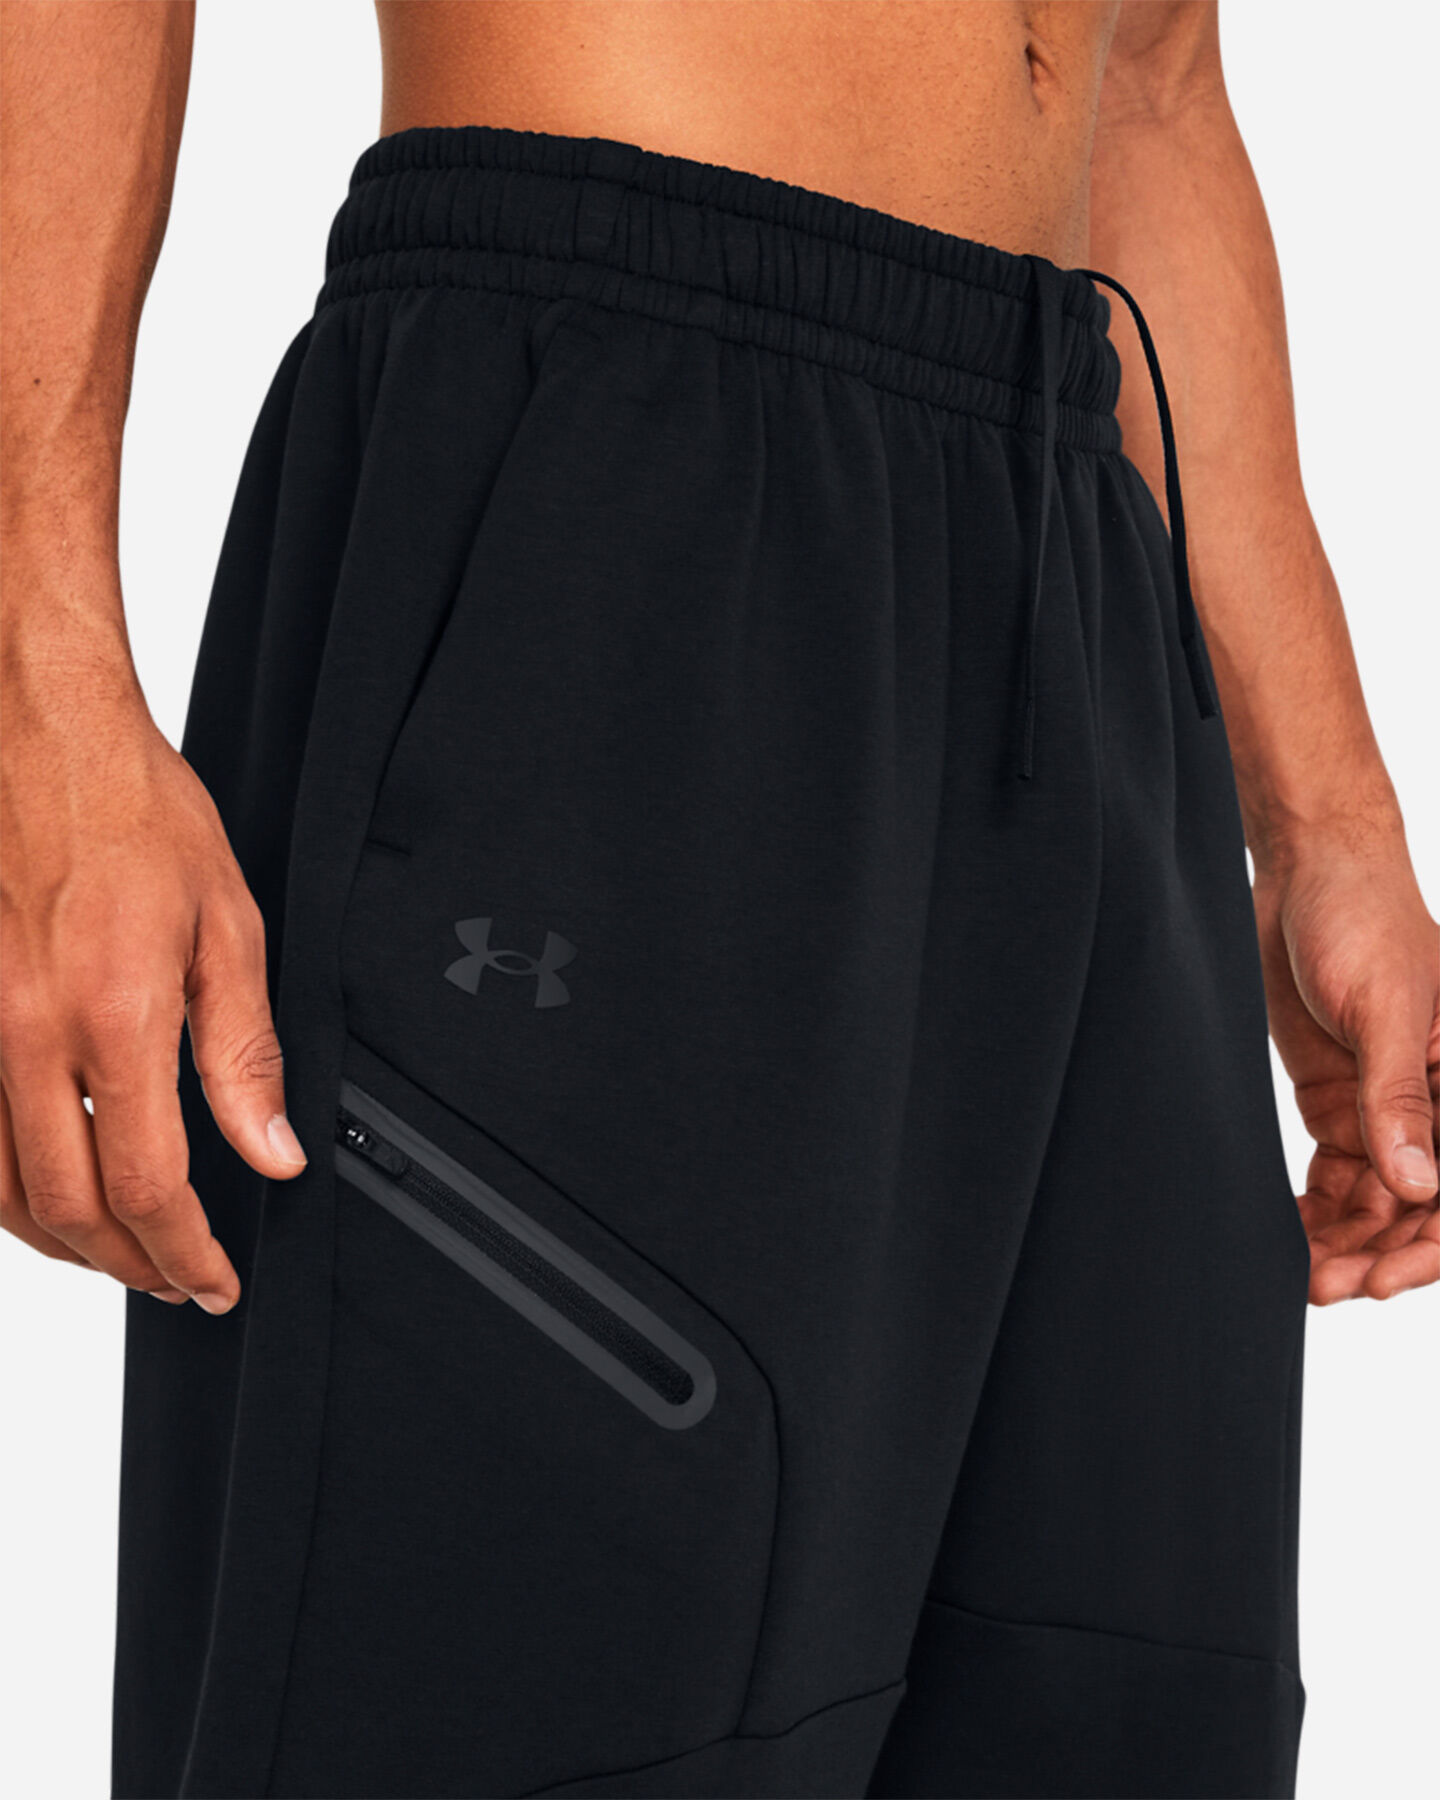  Pantalone UNDER ARMOUR UNSTOPPABLE BAGGY CROP M S5642101|0001|SM scatto 4